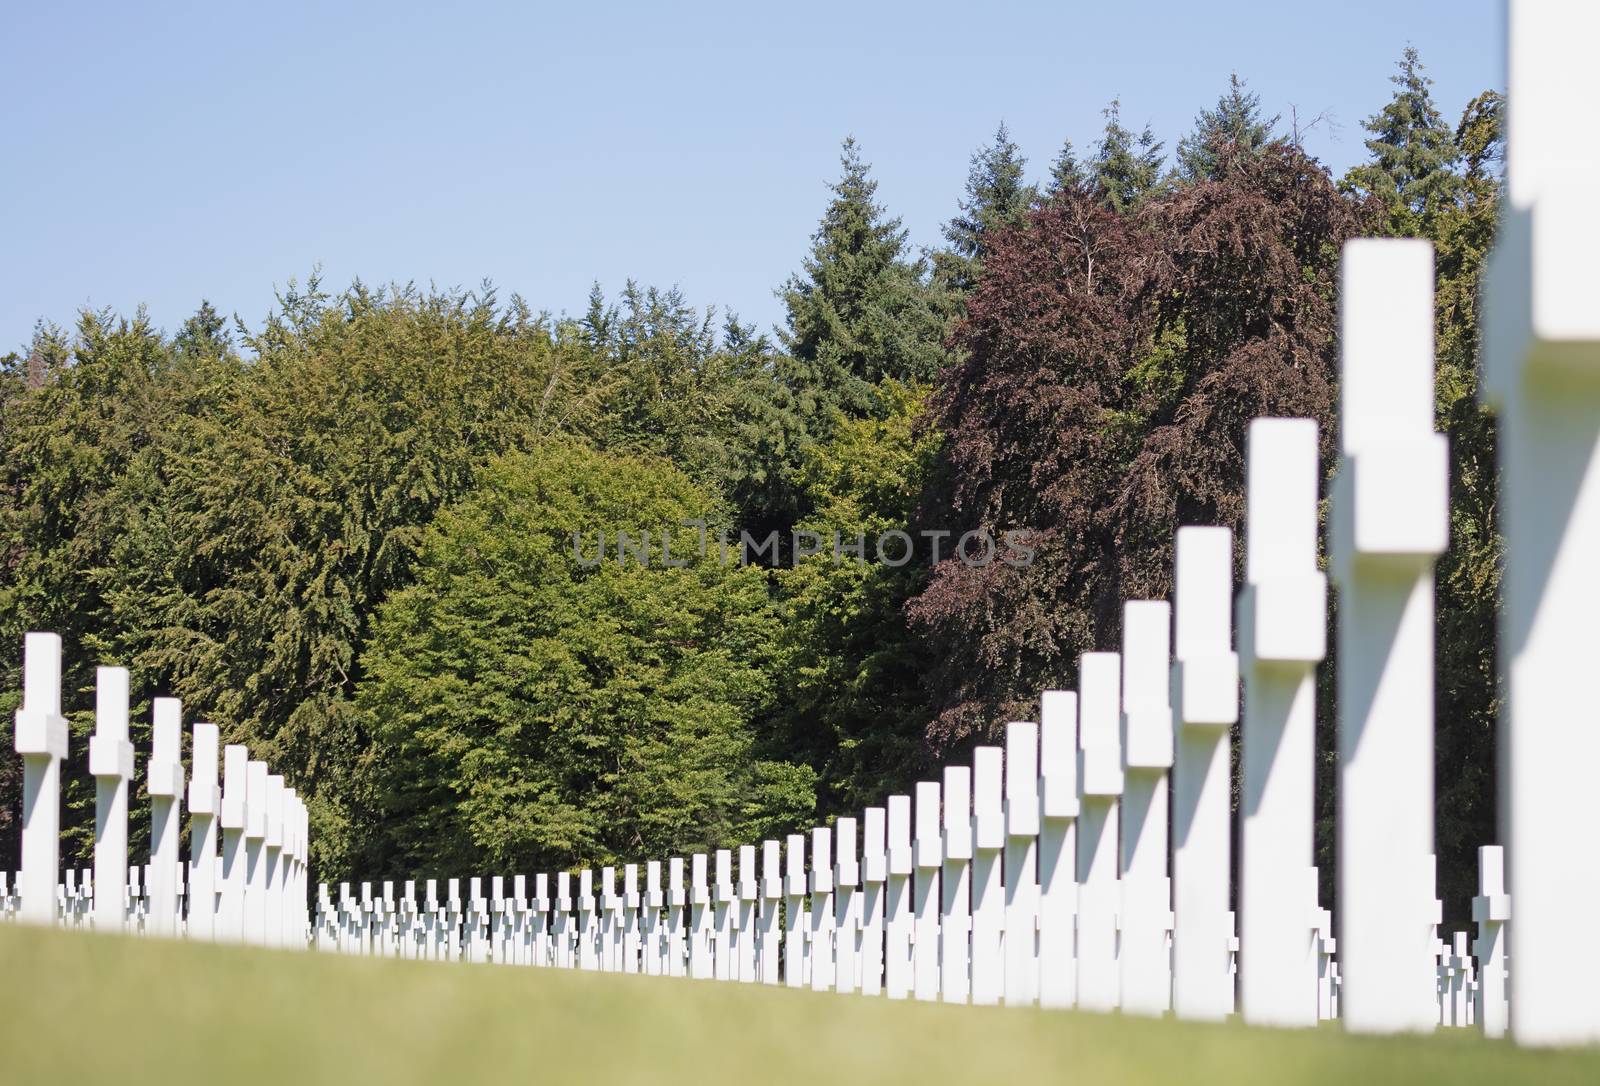 Rows of graves in the American mlitary cemetary in Luxembourg